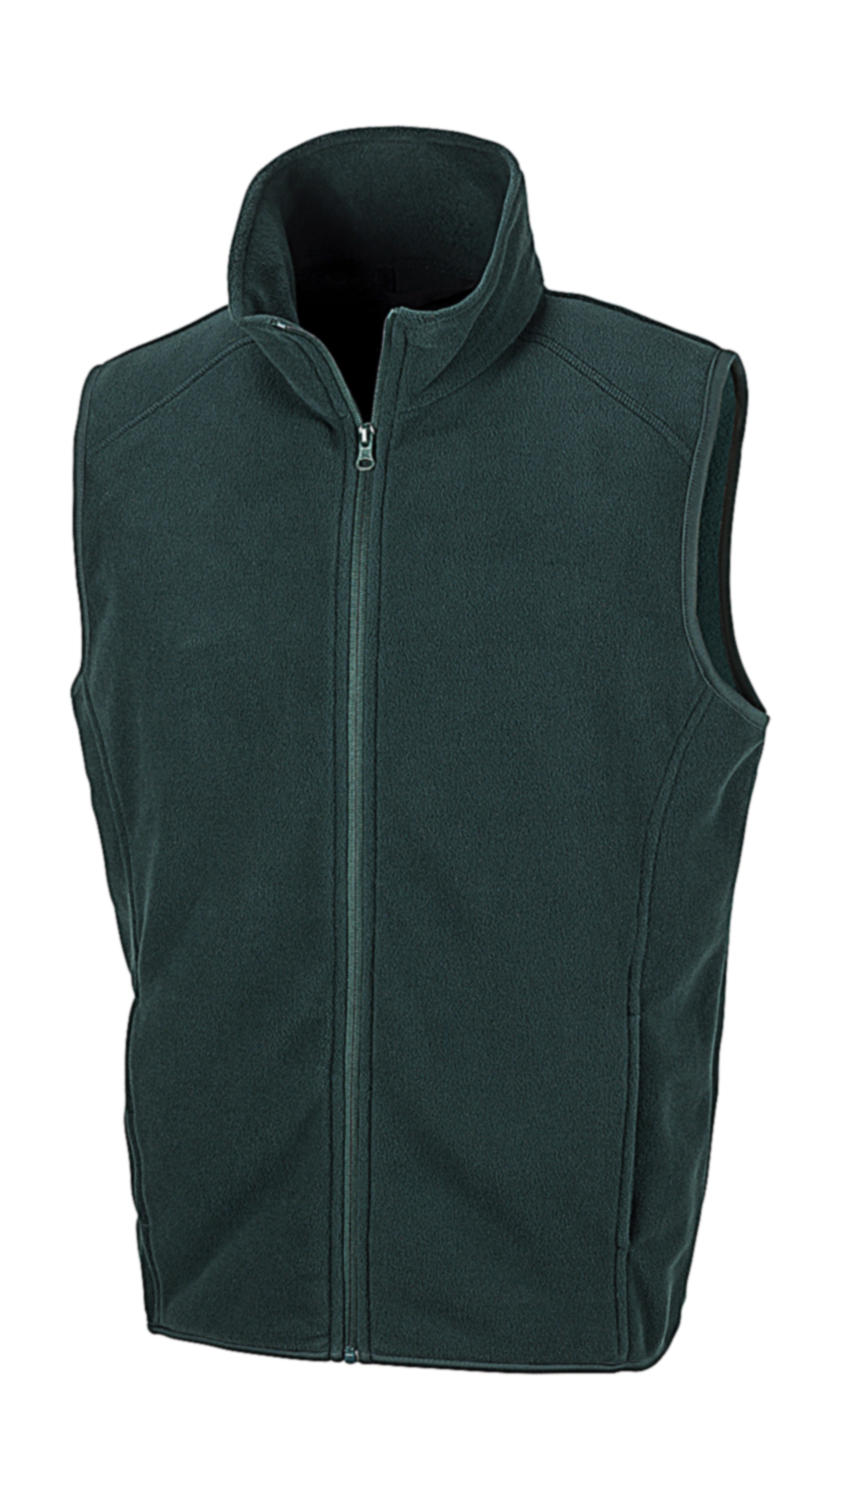  Micro Fleece Gilet in Farbe Forest